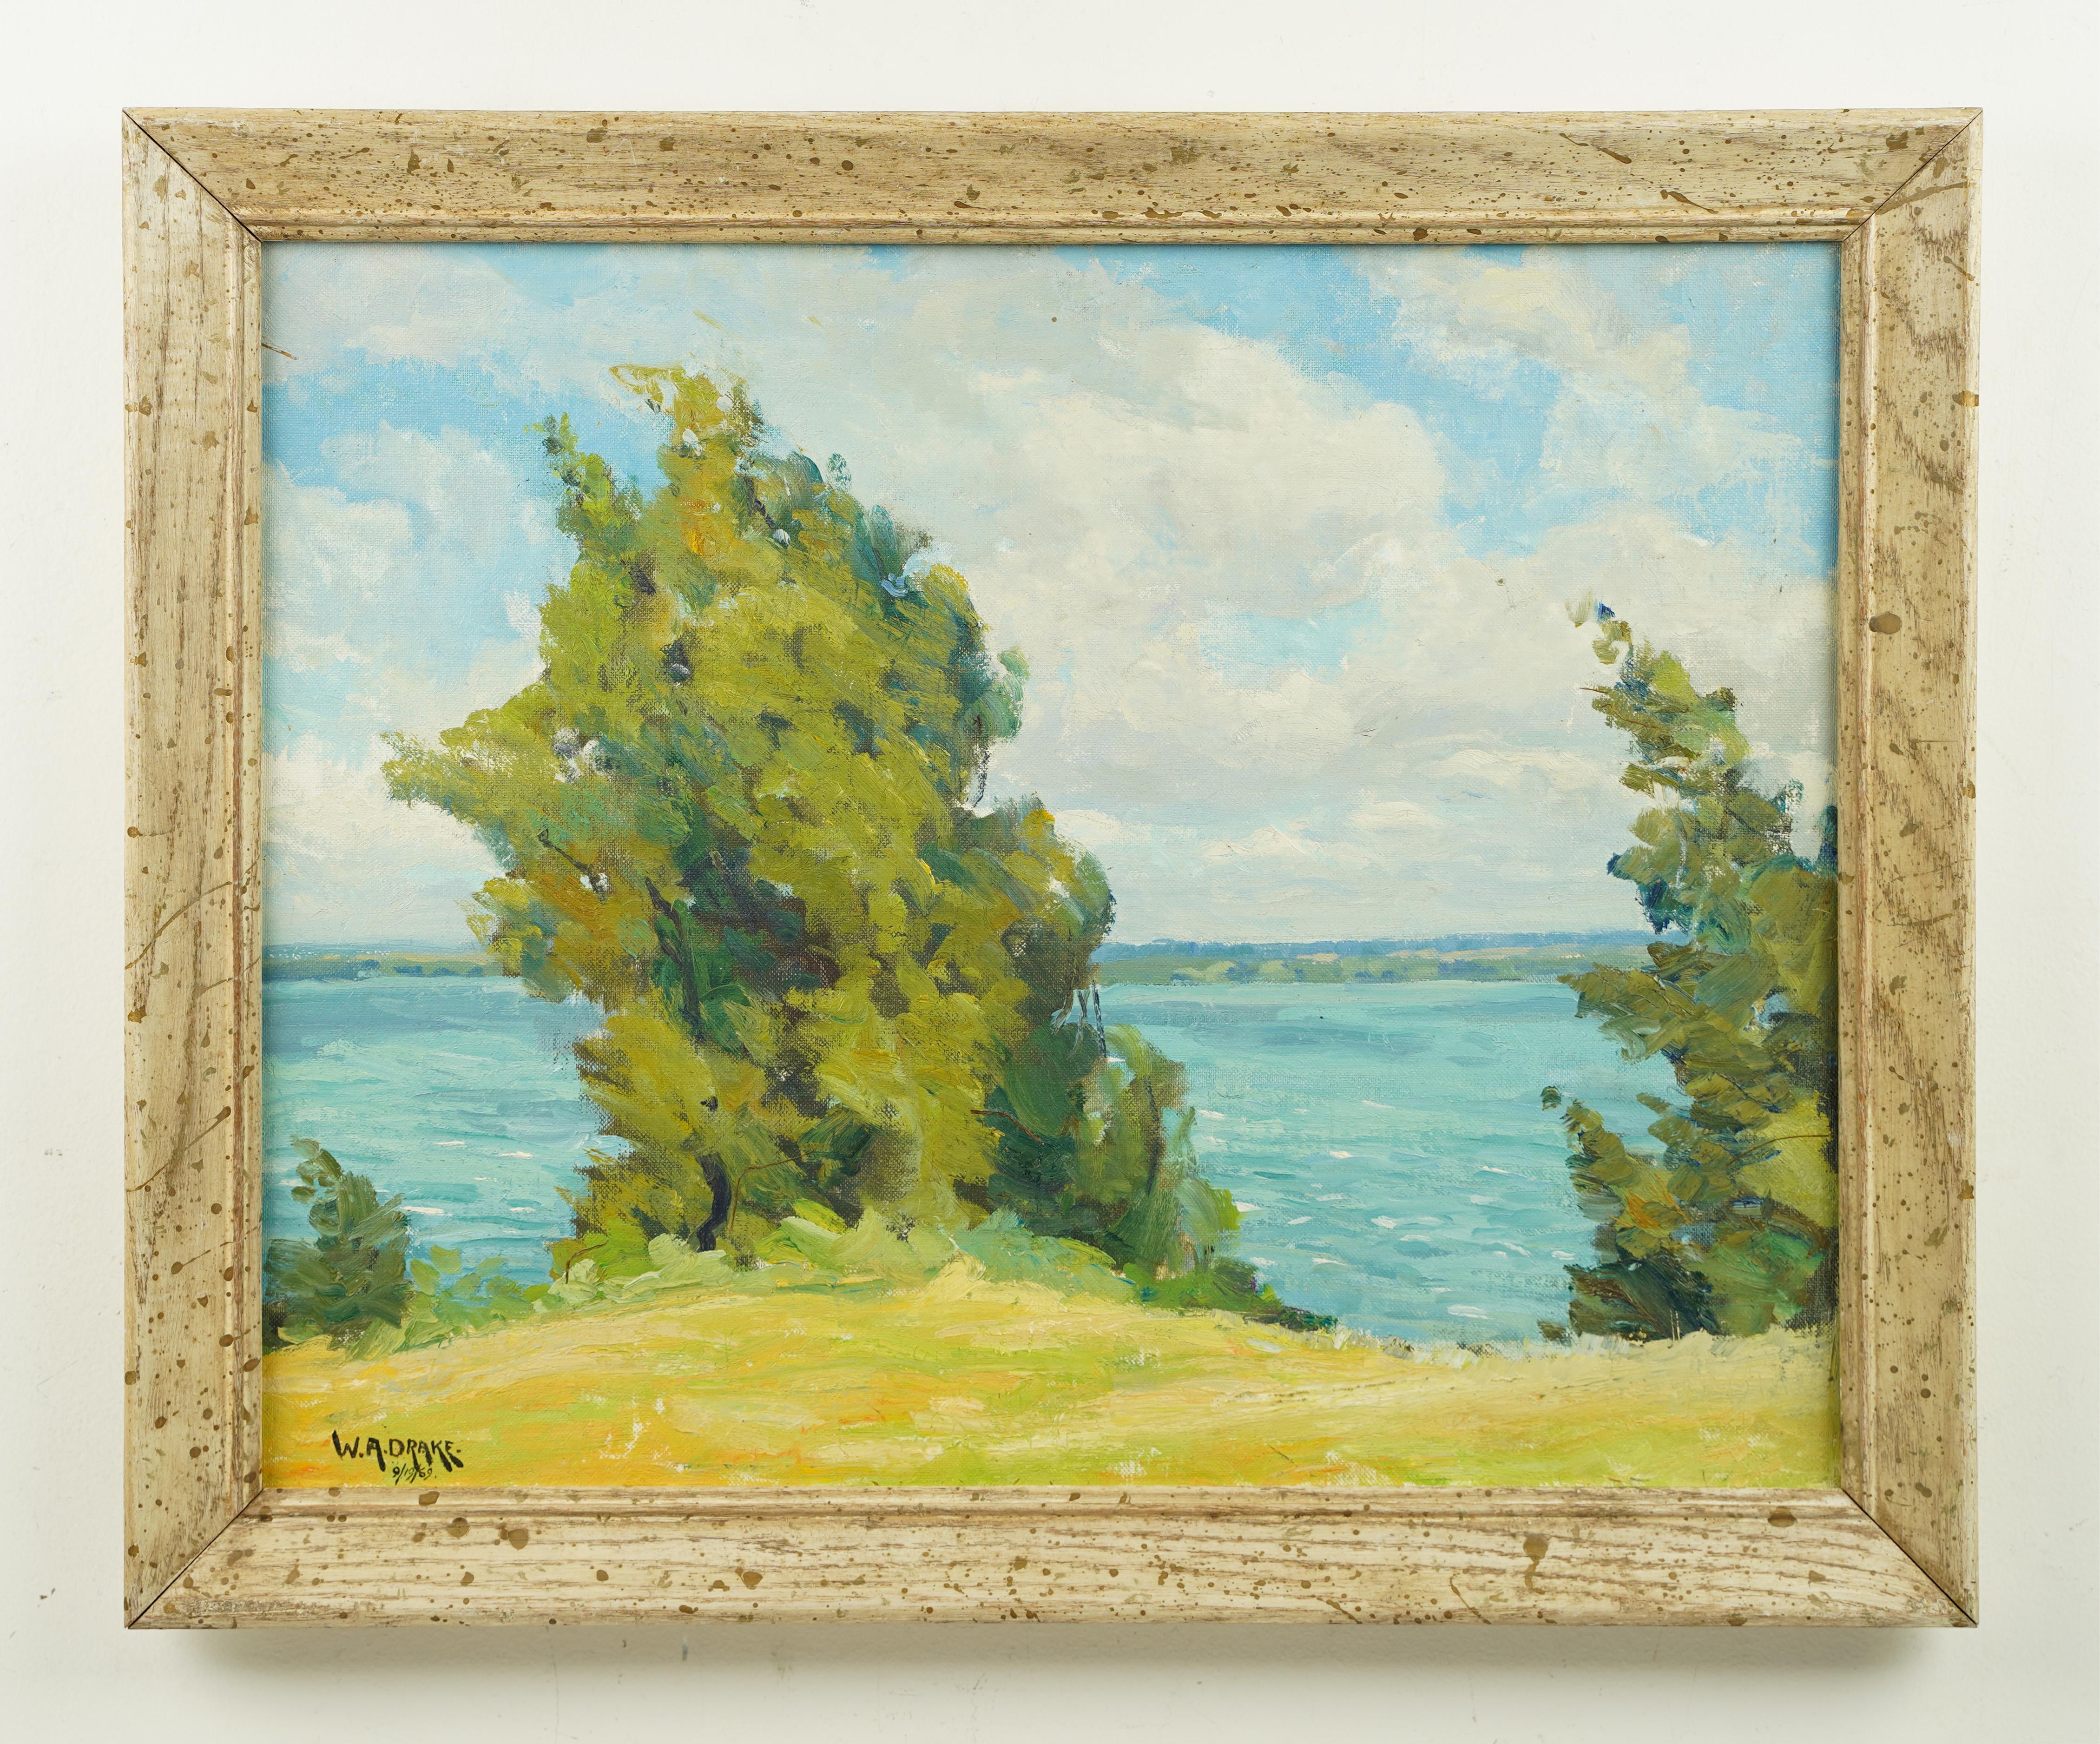 Antique American impressionist seascape signed oil painting.  Oil on board.  Signed.  Framed.  Image size, 20L x 16H.